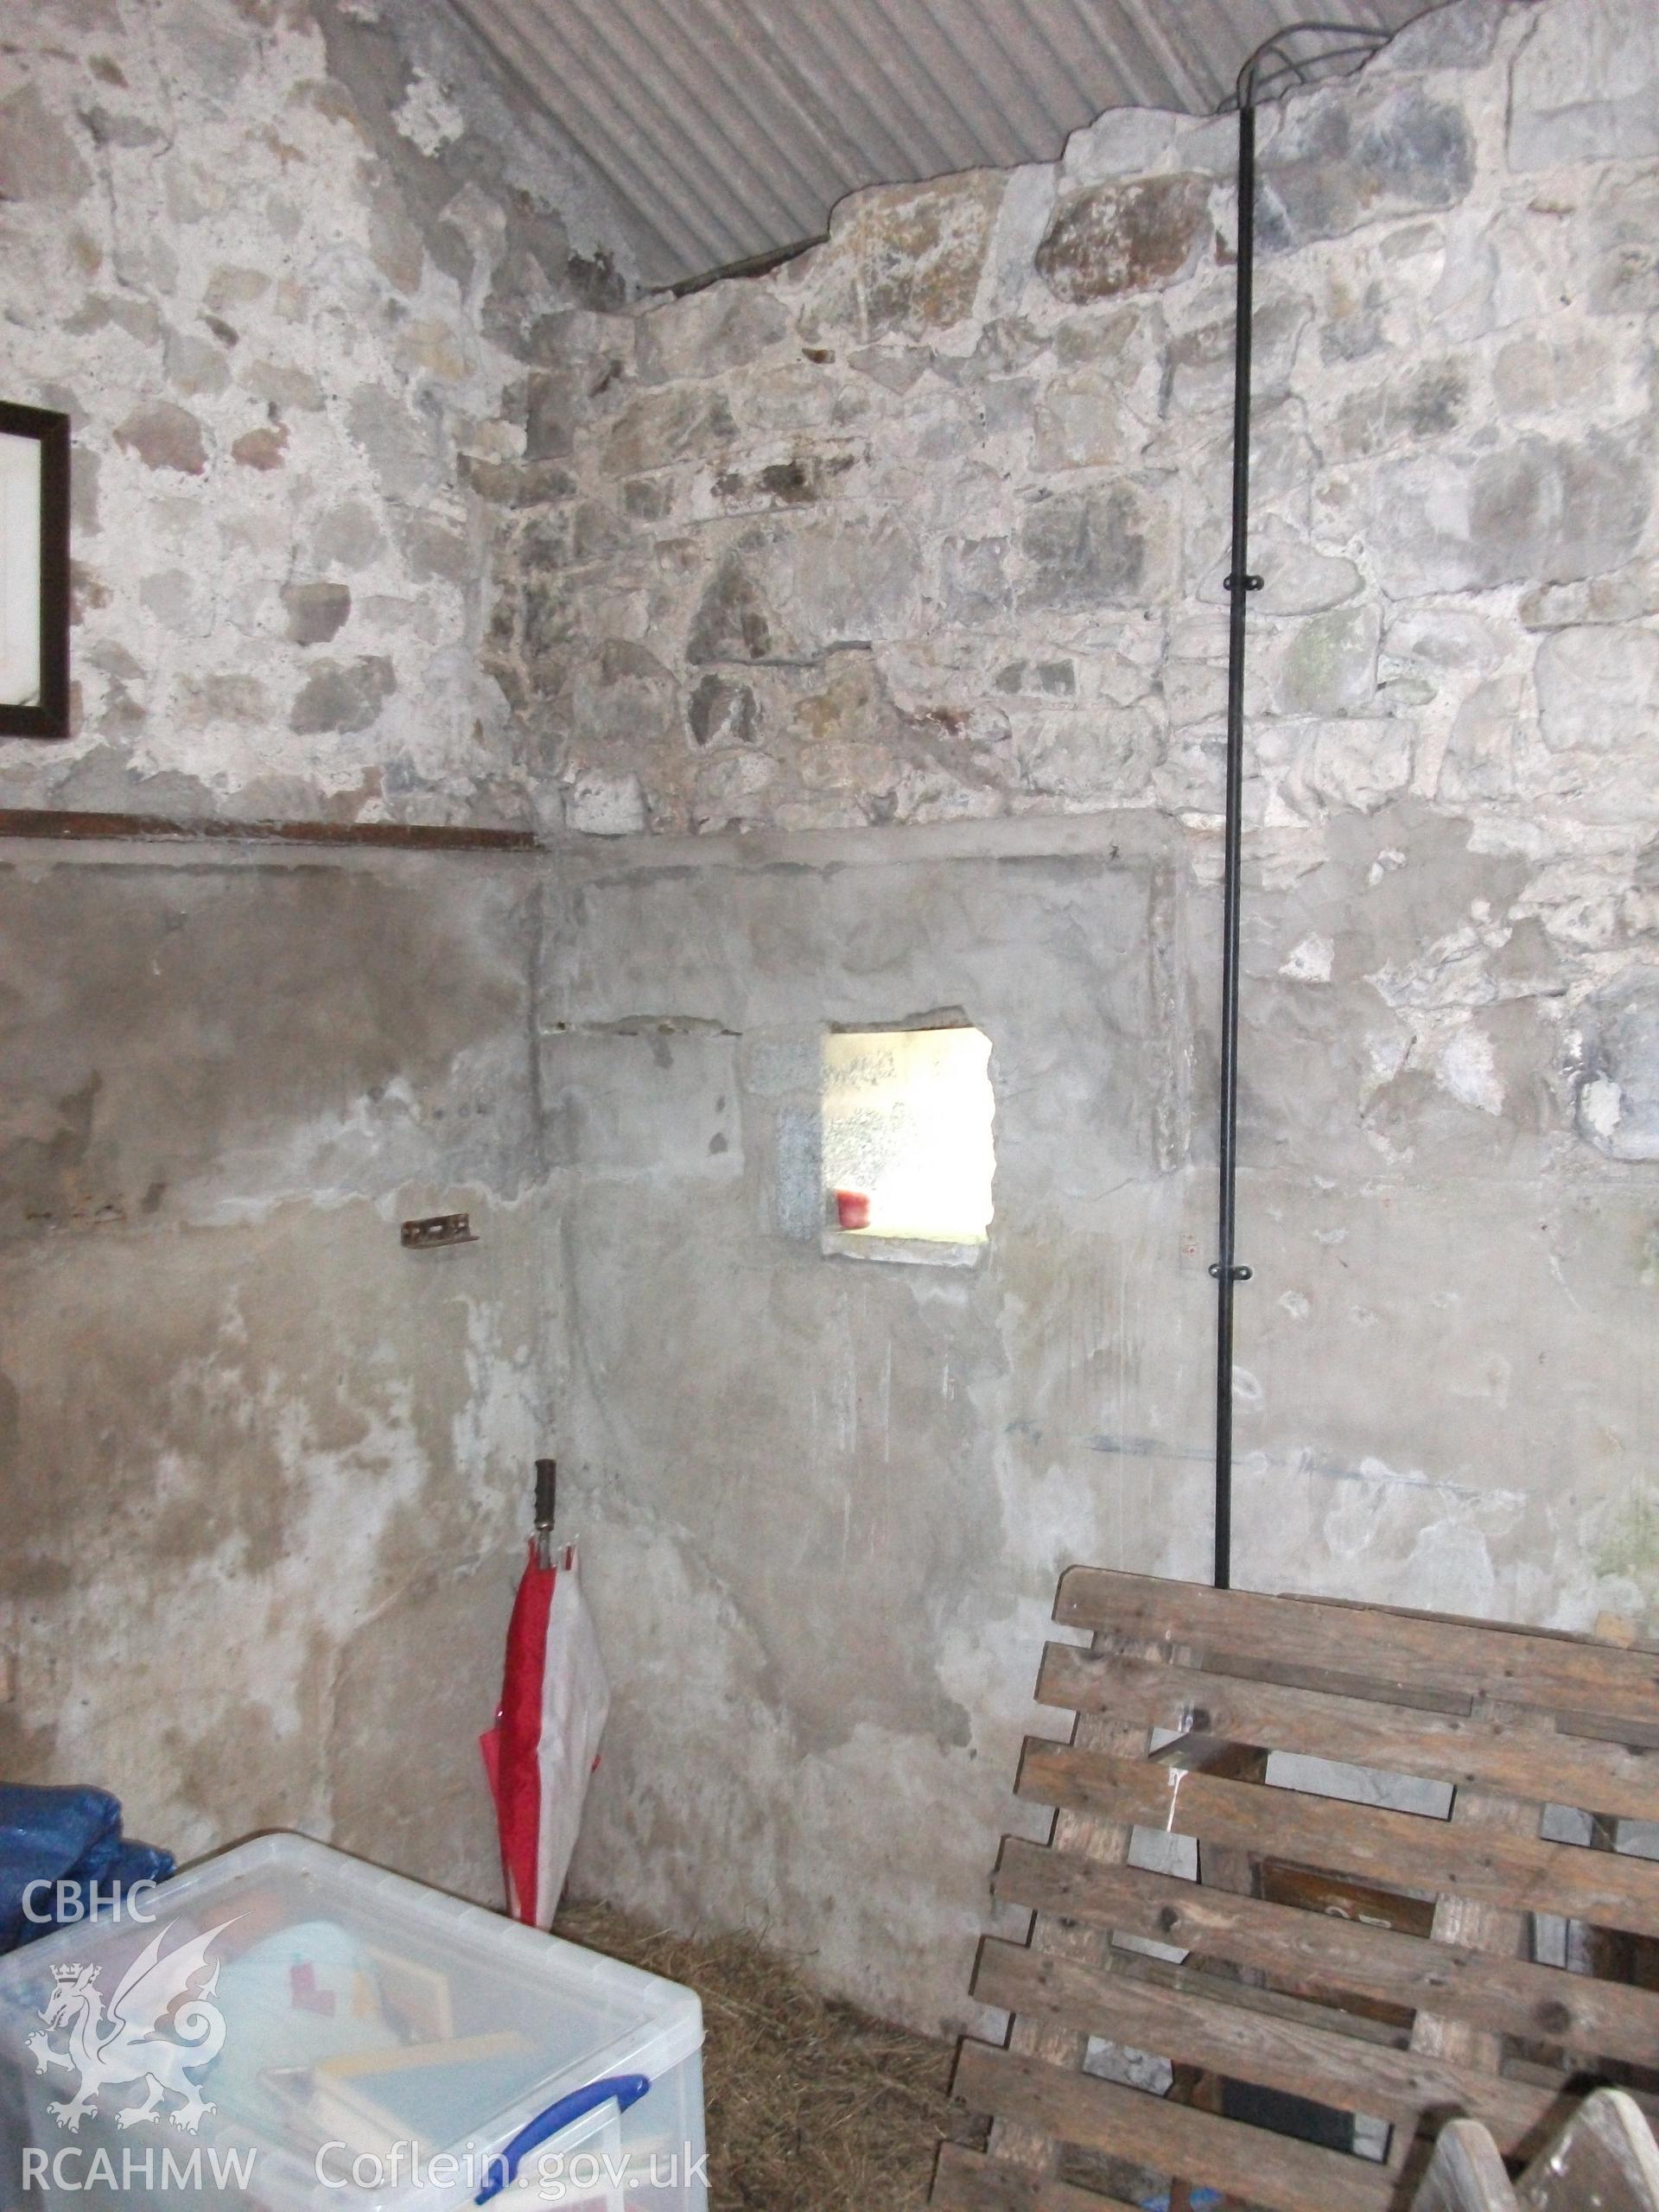 Photograph showing detailed interior view of ale and pail barn's partially plastered stone wall, at Pant-y-Castell, Maesybont, Photographed by Mark Waghorn to meet a condition attached to planning application.